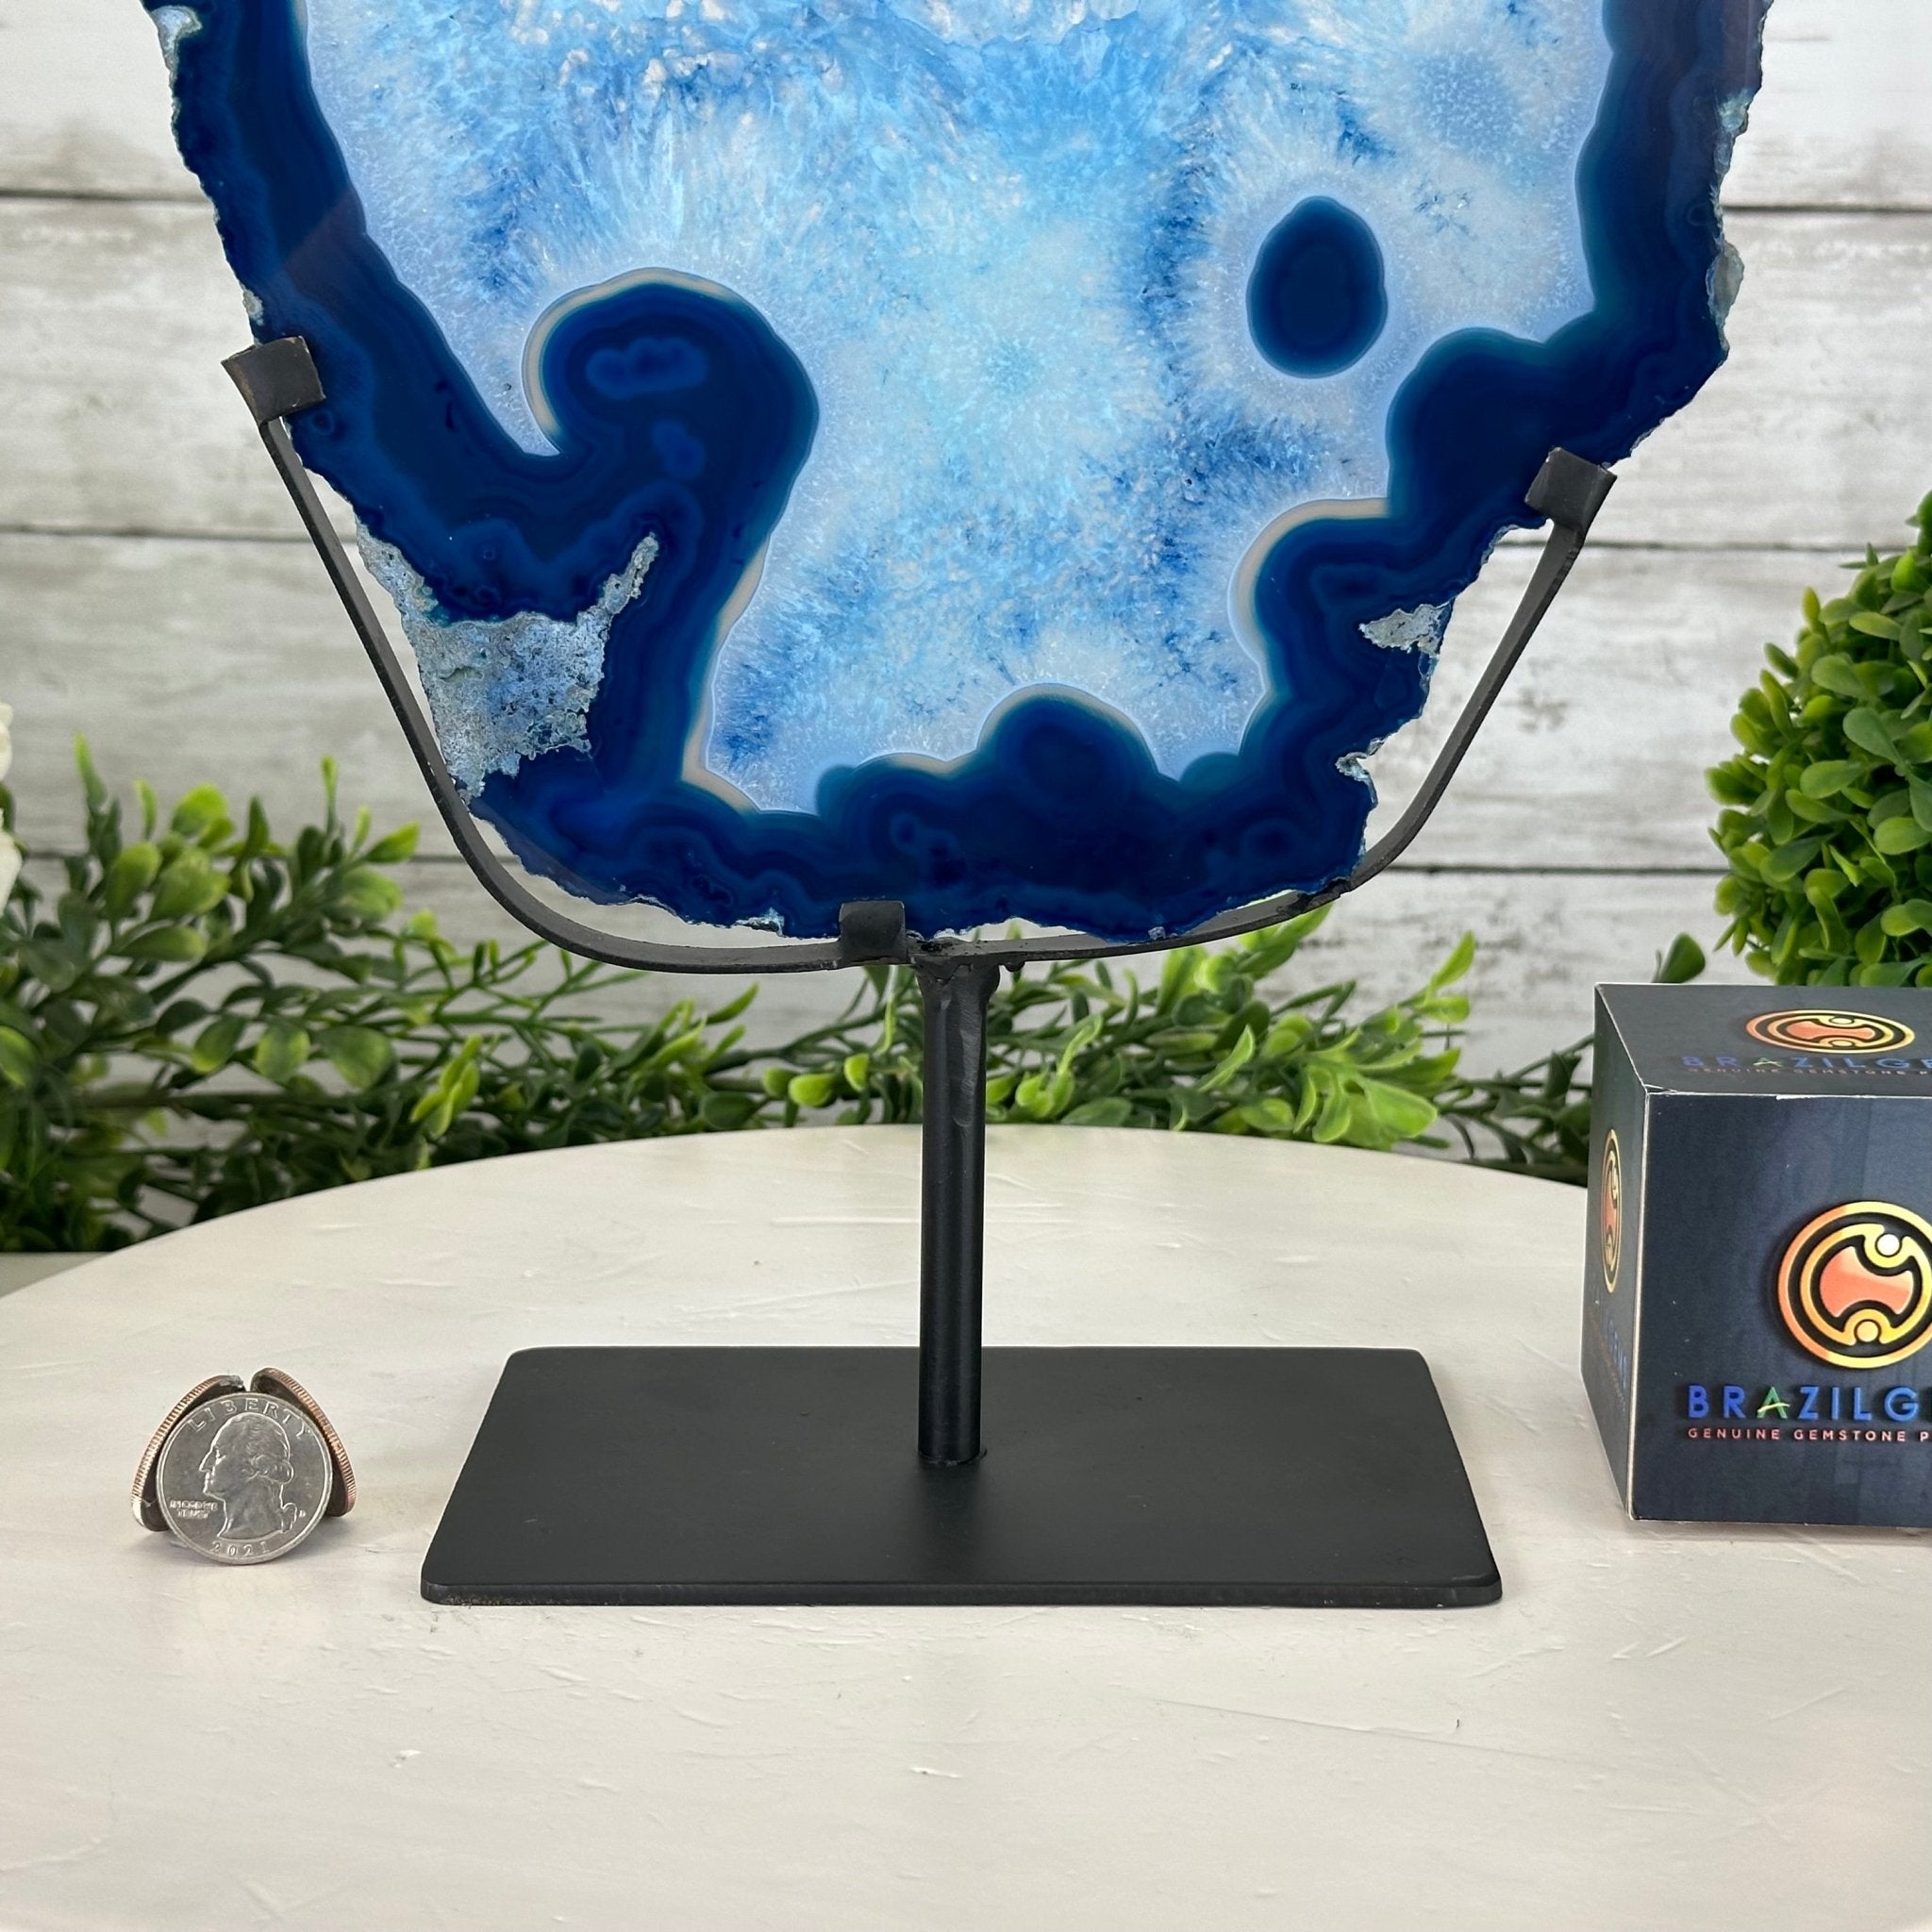 Brazilian Blue Agate Slice on a Metal Stand, 13.5" Tall Model #5055-0197 - Brazil GemsBrazil GemsBrazilian Blue Agate Slice on a Metal Stand, 13.5" Tall Model #5055-0197Slices on Fixed Bases5055-0197